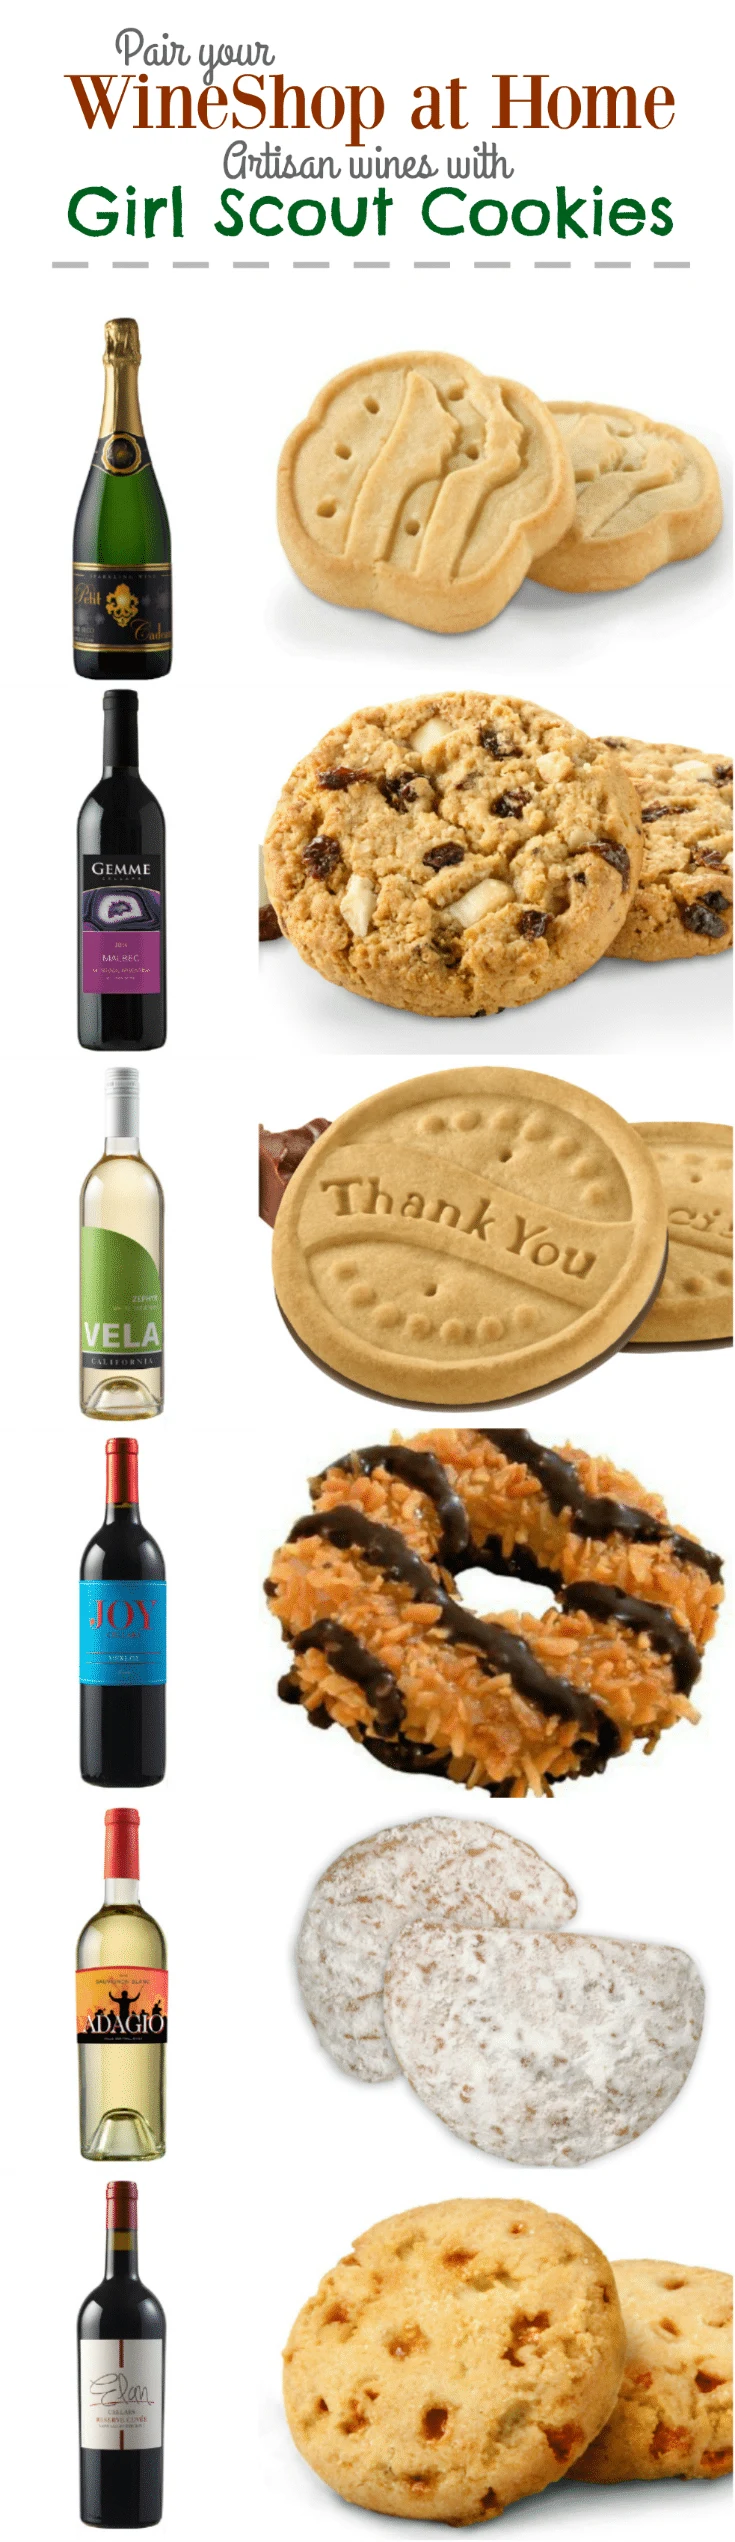 WineShop at Home and Girl Scout Cookies